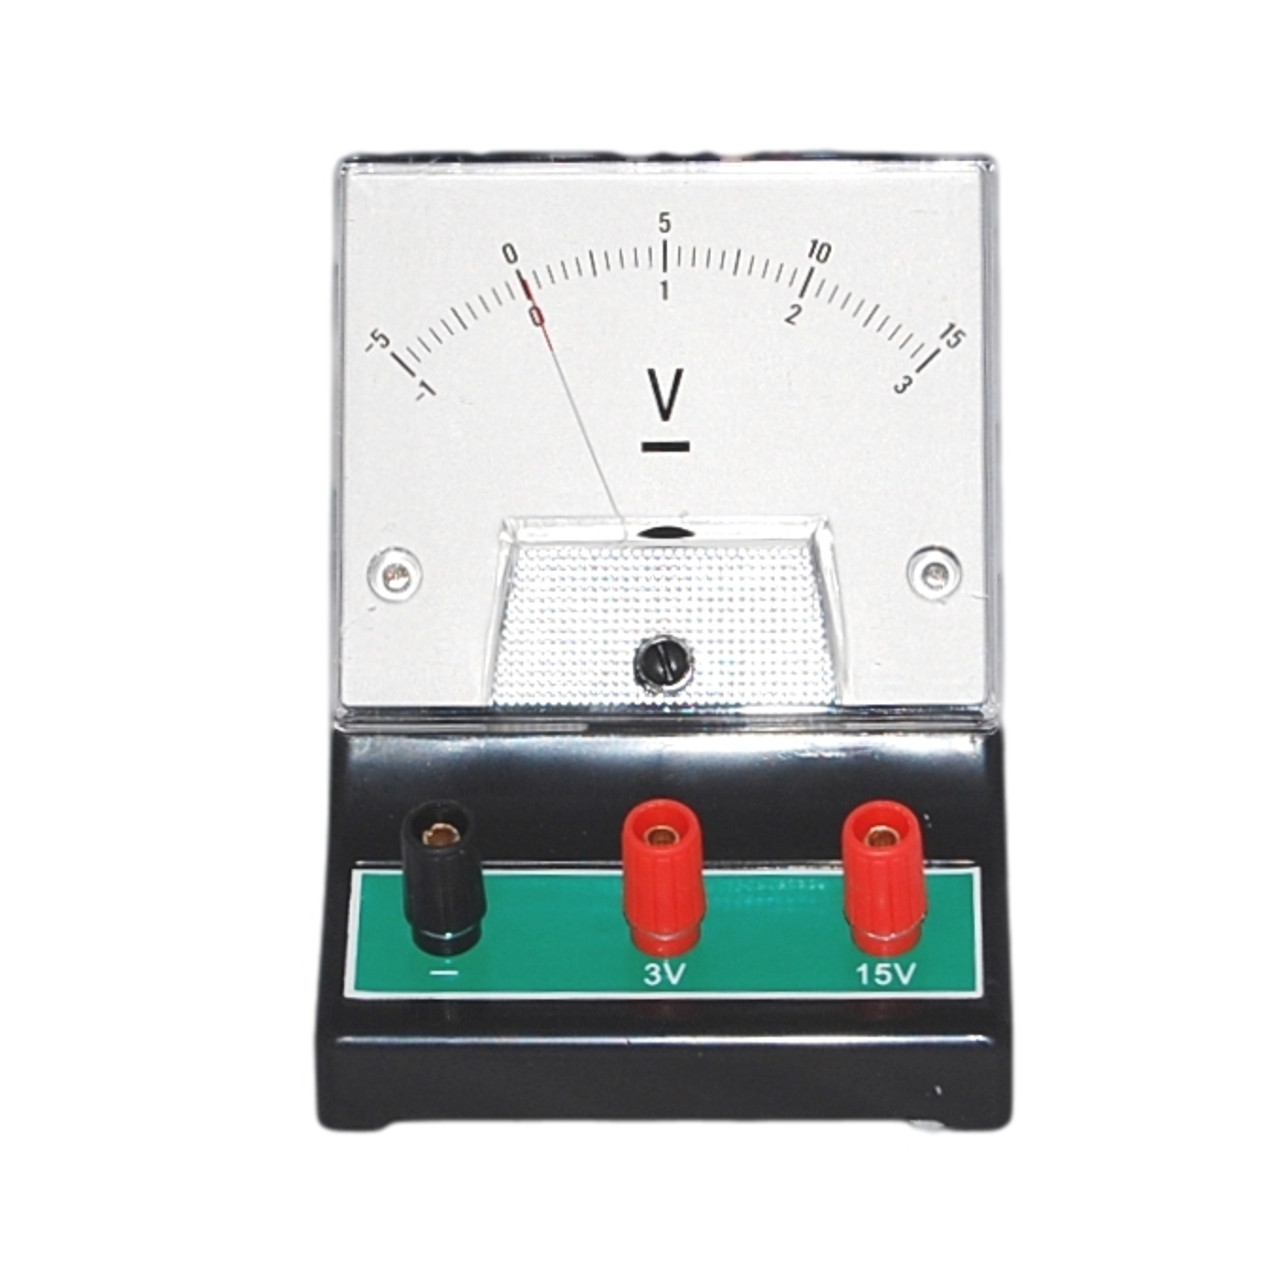 Analog Voltmeter, For Laboratory, Voltage: 0 To 5v at Rs 999/piece